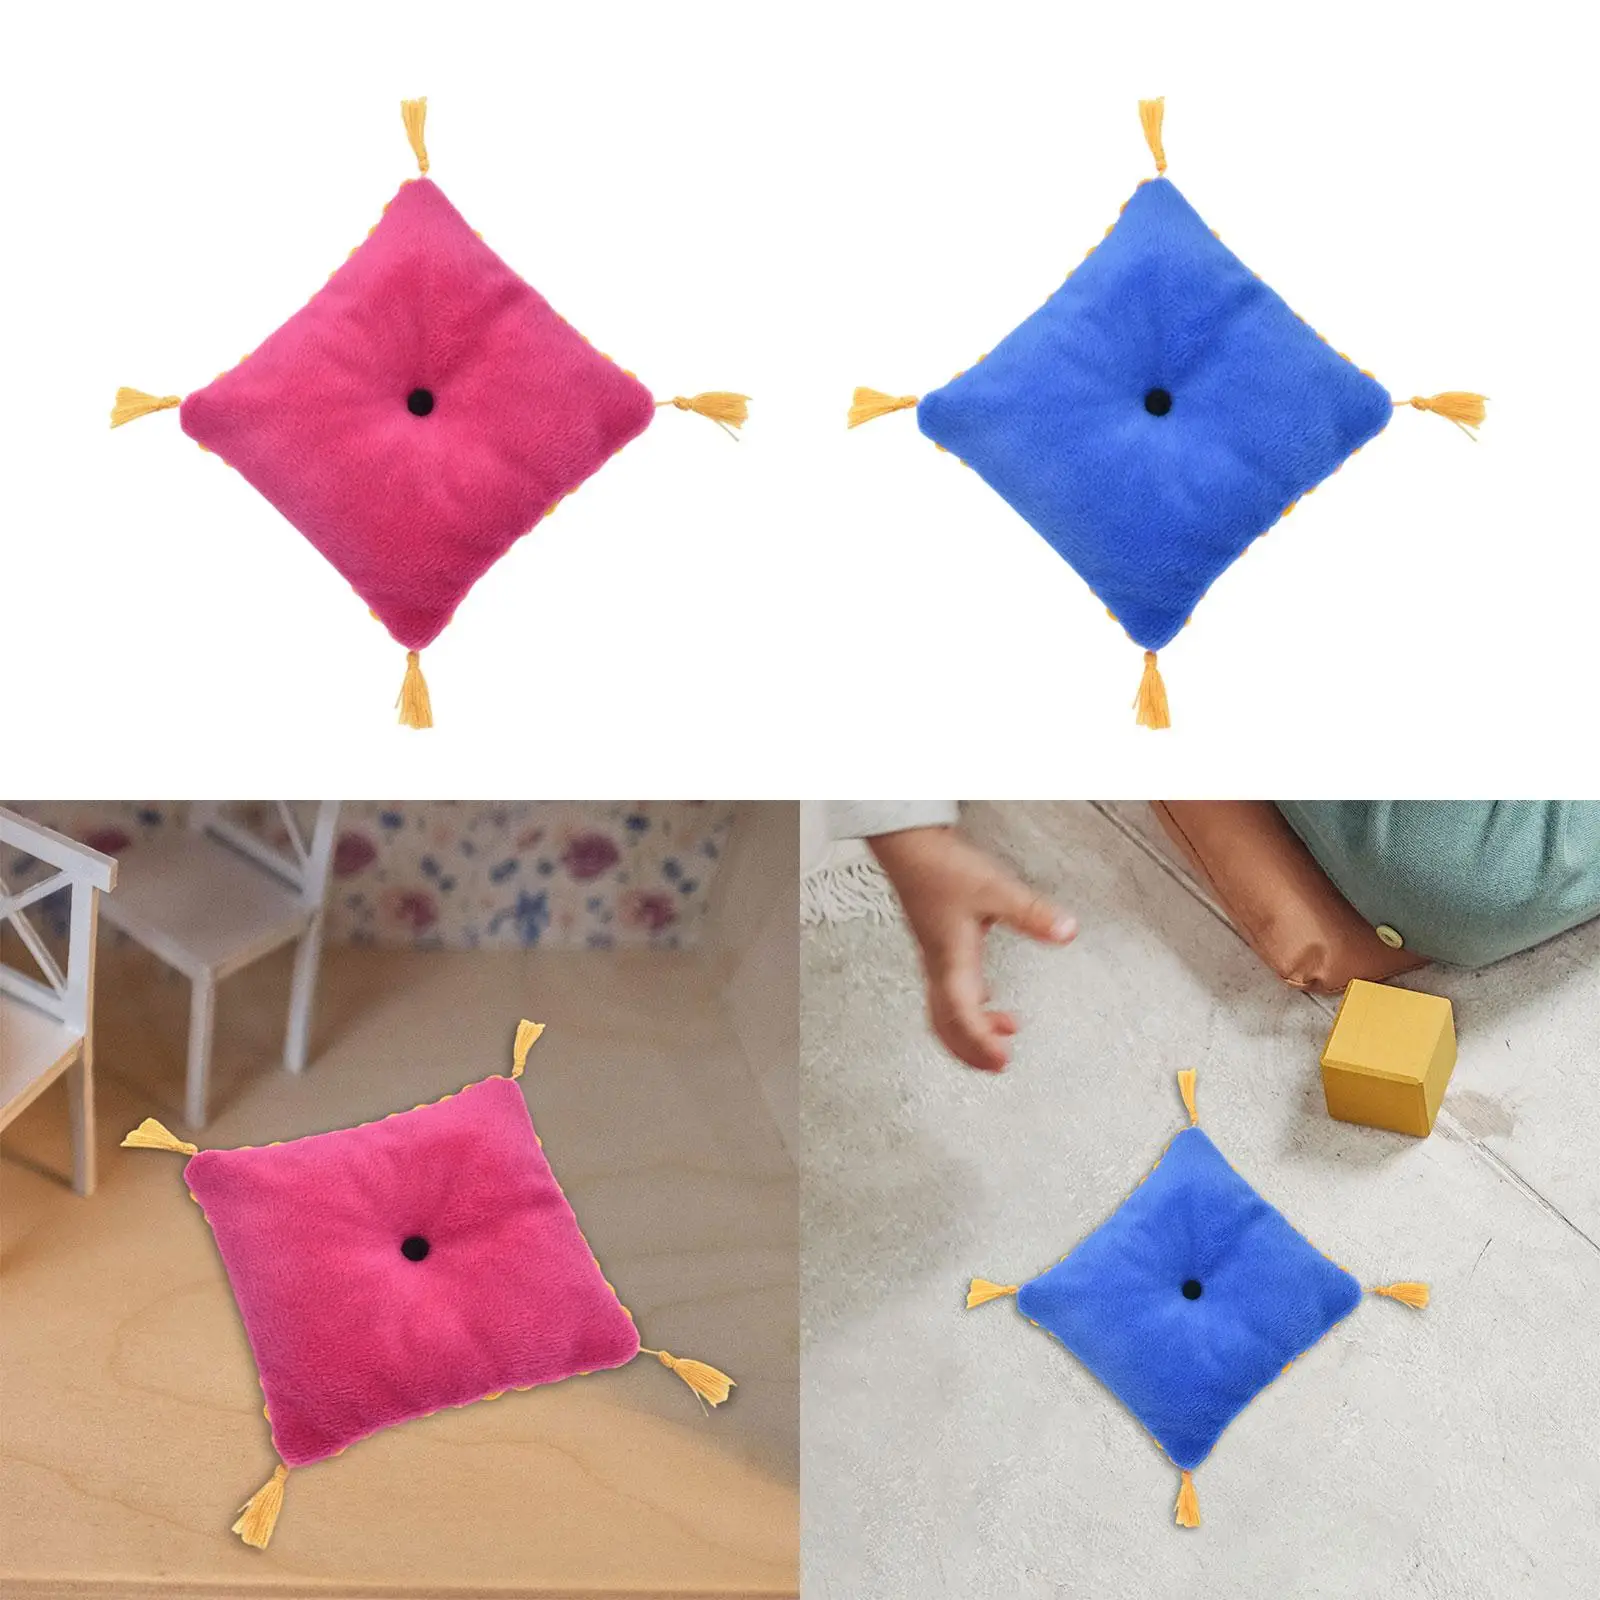 Simulation 1/6 Dollhouse Pillow Decor Micro Landscape Ornament Miniature Furniture Accessory for Kids Girls Boys Gifts